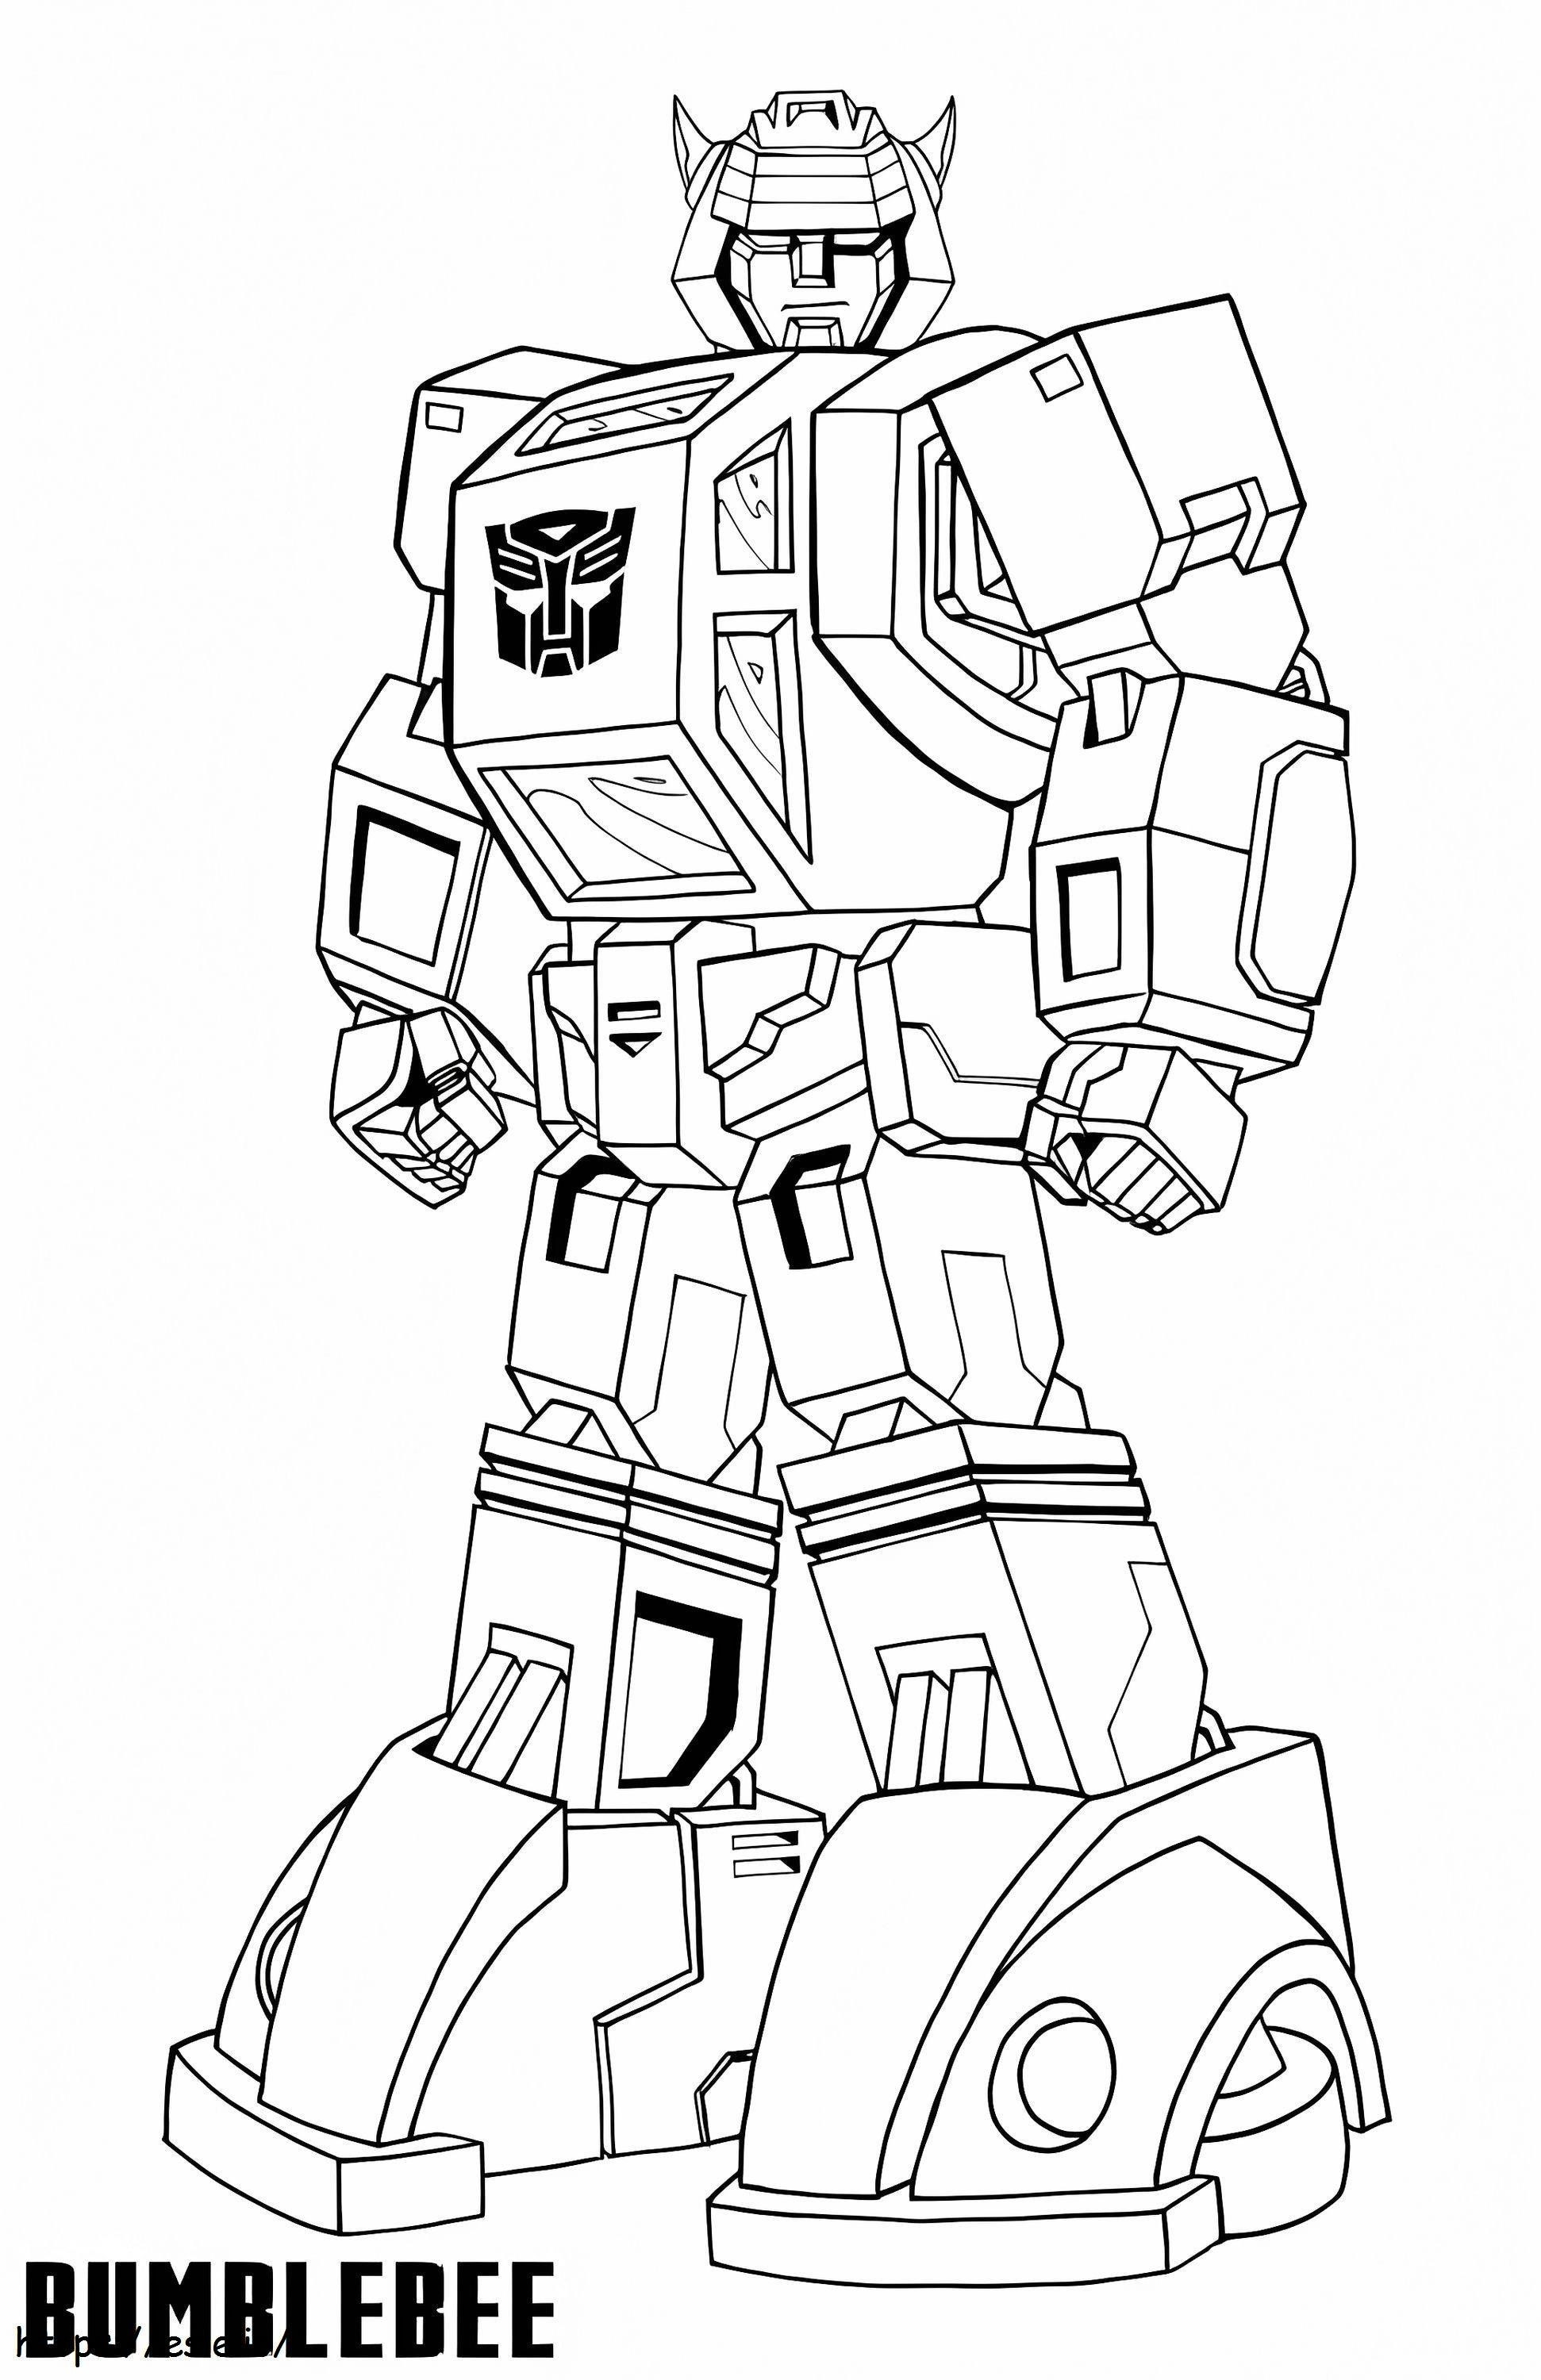 Bumblebee The Cartoon coloring page